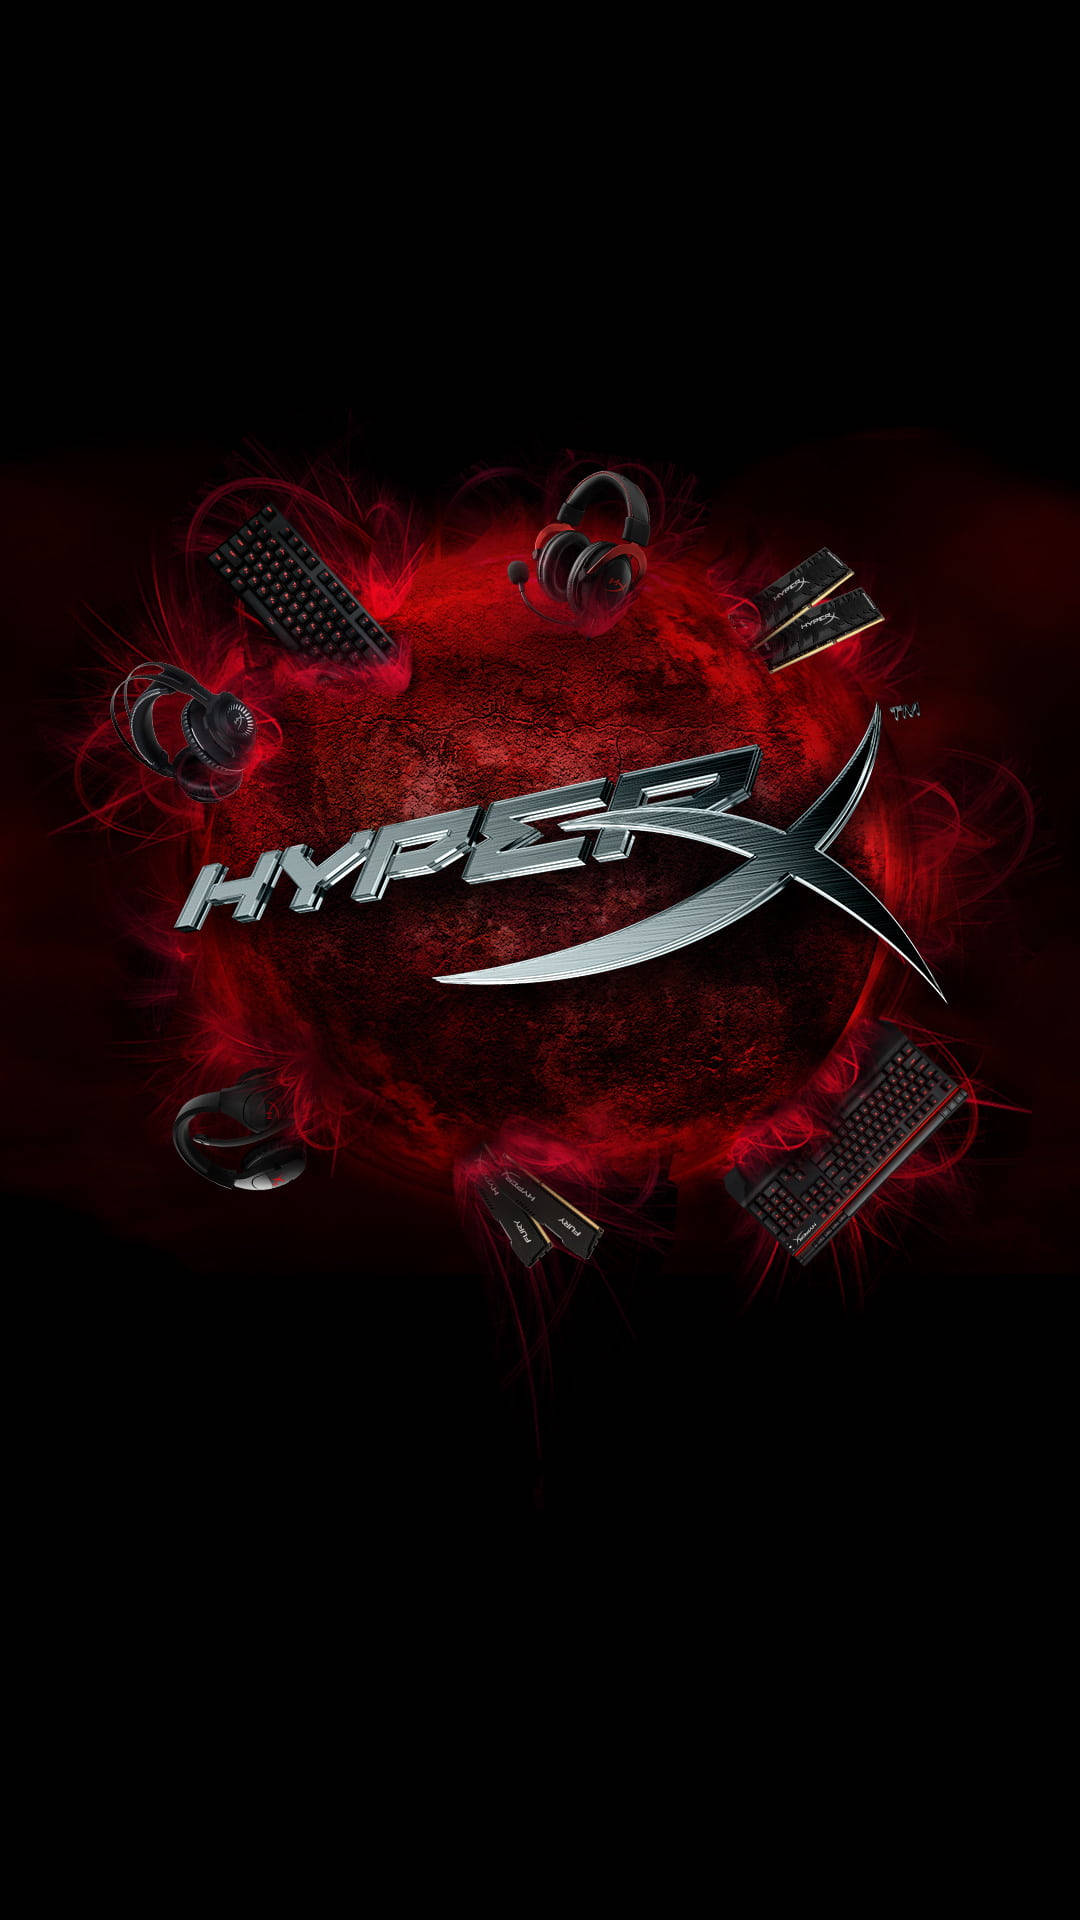 Download Hyperx Black And Red Gaming Wallpaper 5654